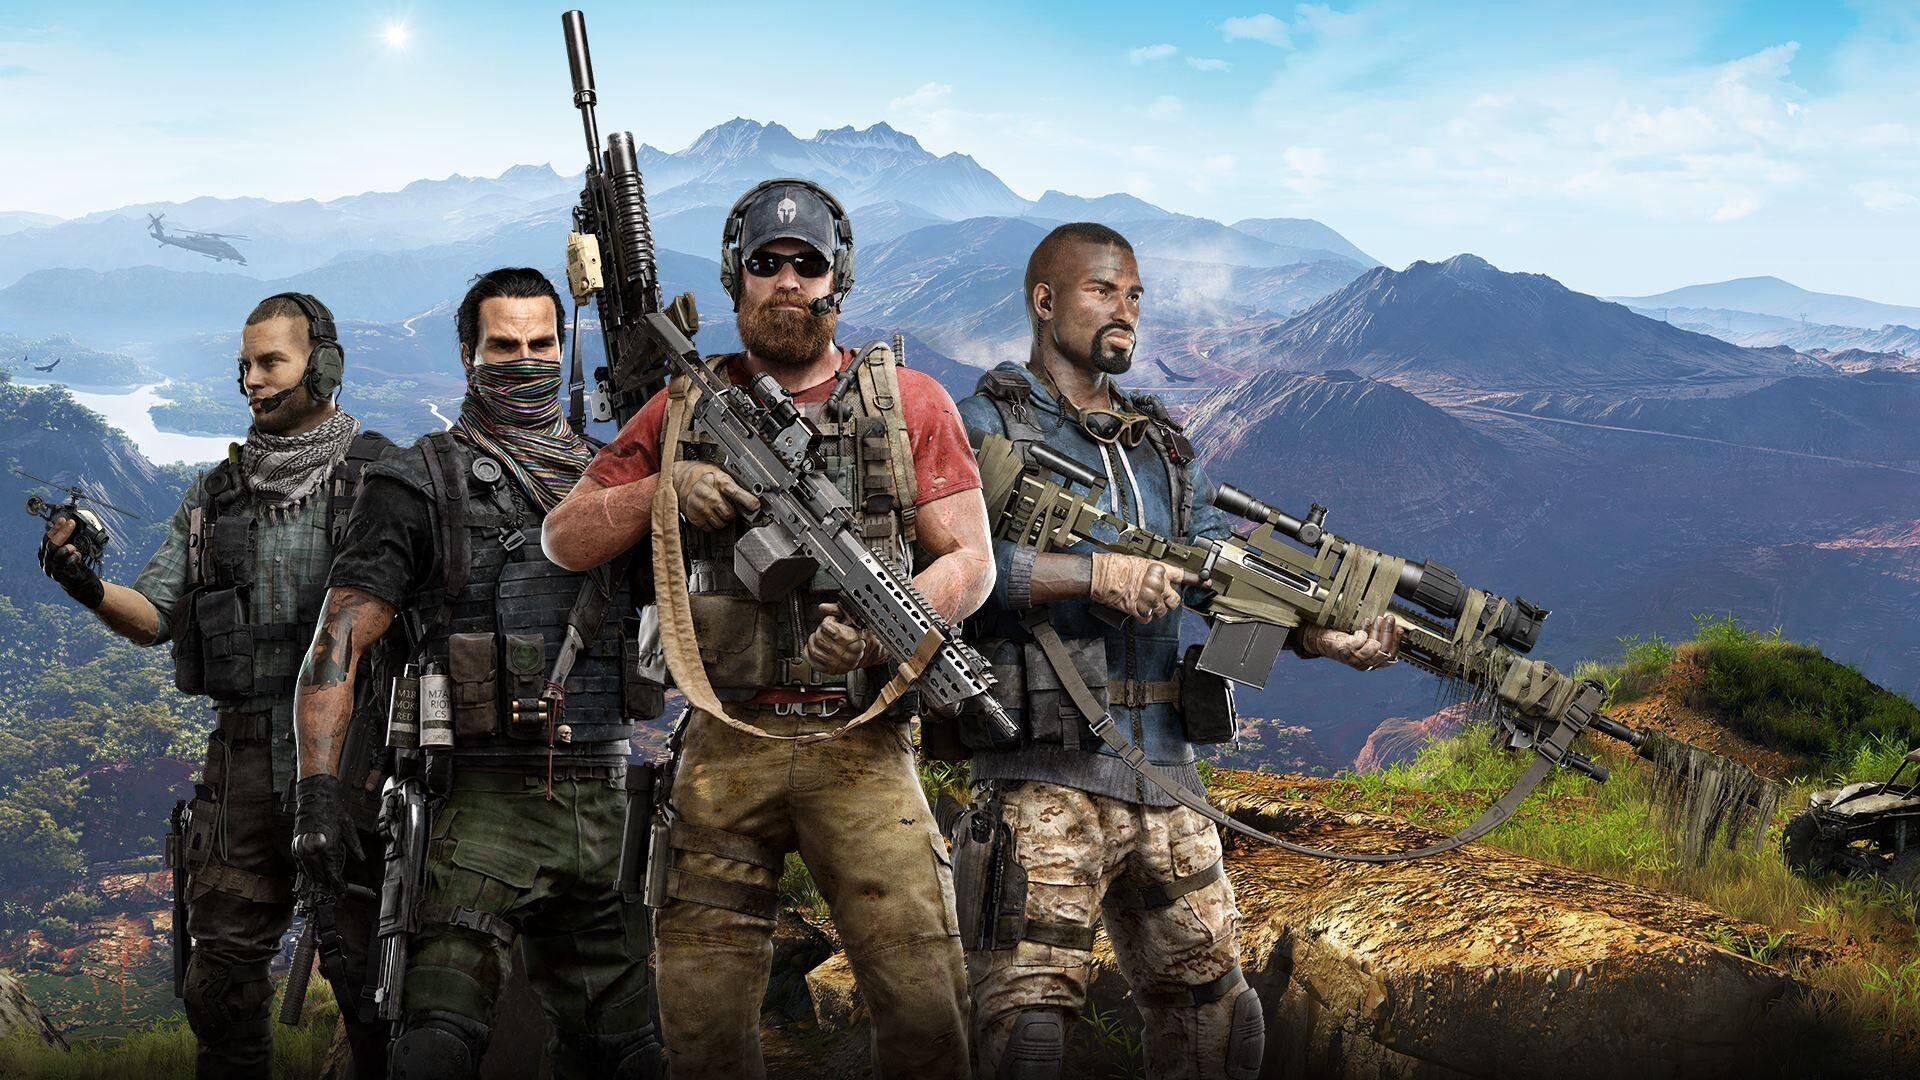 Ghost Recon: Wildlands: Nomad, Midas, Holt, Weaver, The members of the joint operation special task force. 1920x1080 Full HD Background.